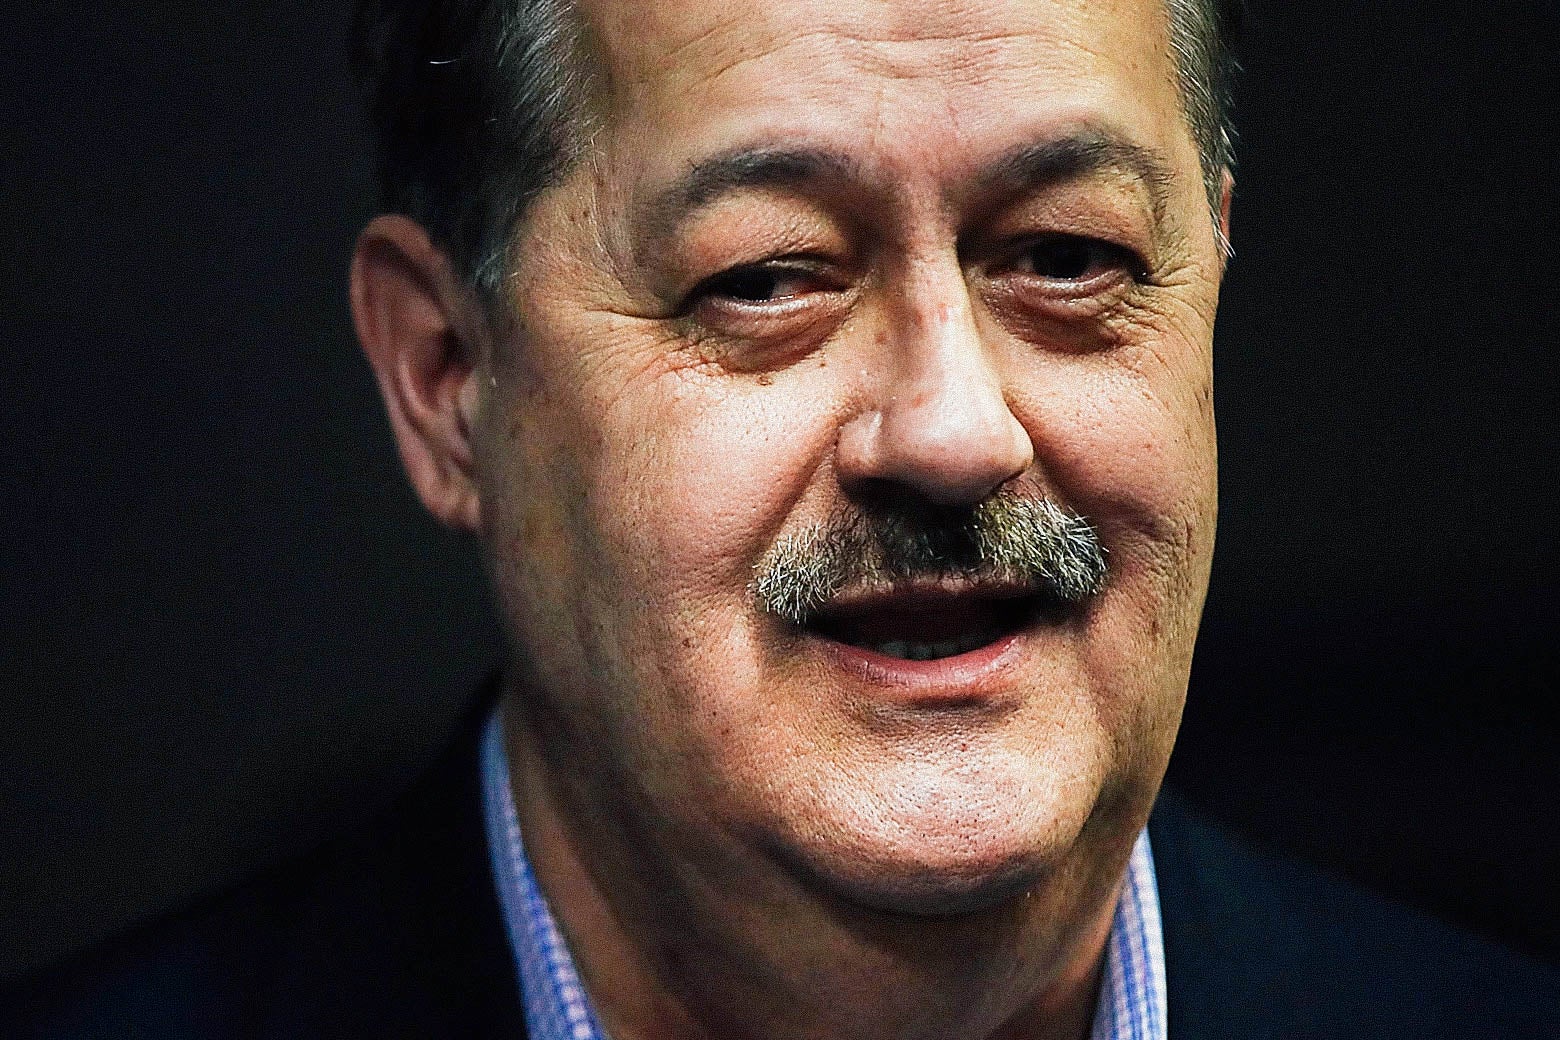 Republican primary candidate for U.S. Senate Don Blankenship speaks at a town hall meeting at West Virginia University on March 1 in Morgantown, West Virginia.